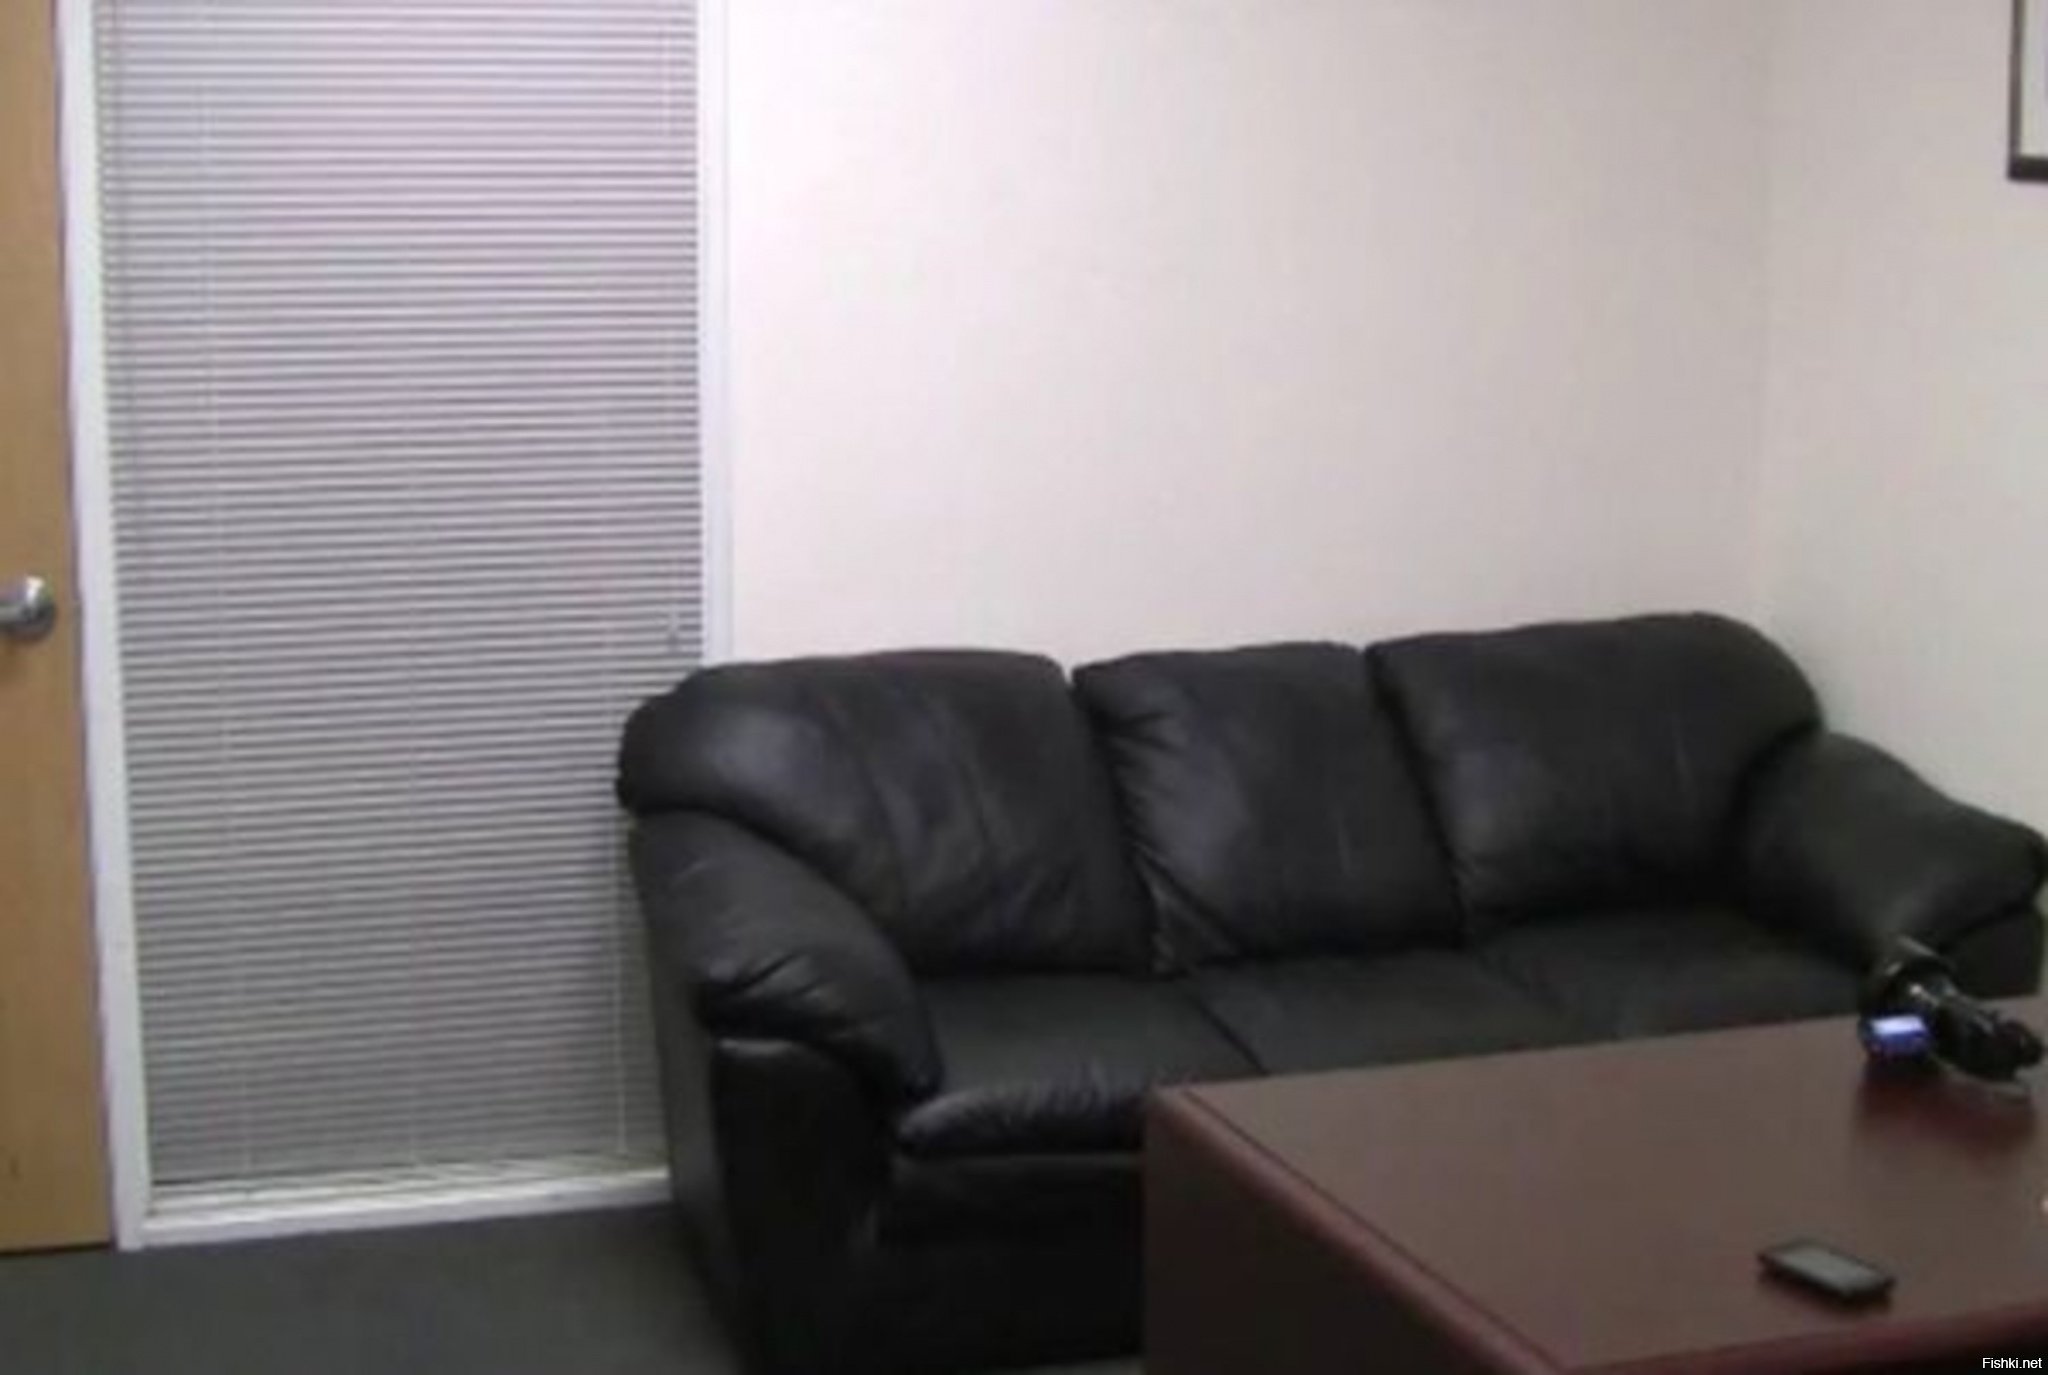 Castingcouch first time petite free porn photo